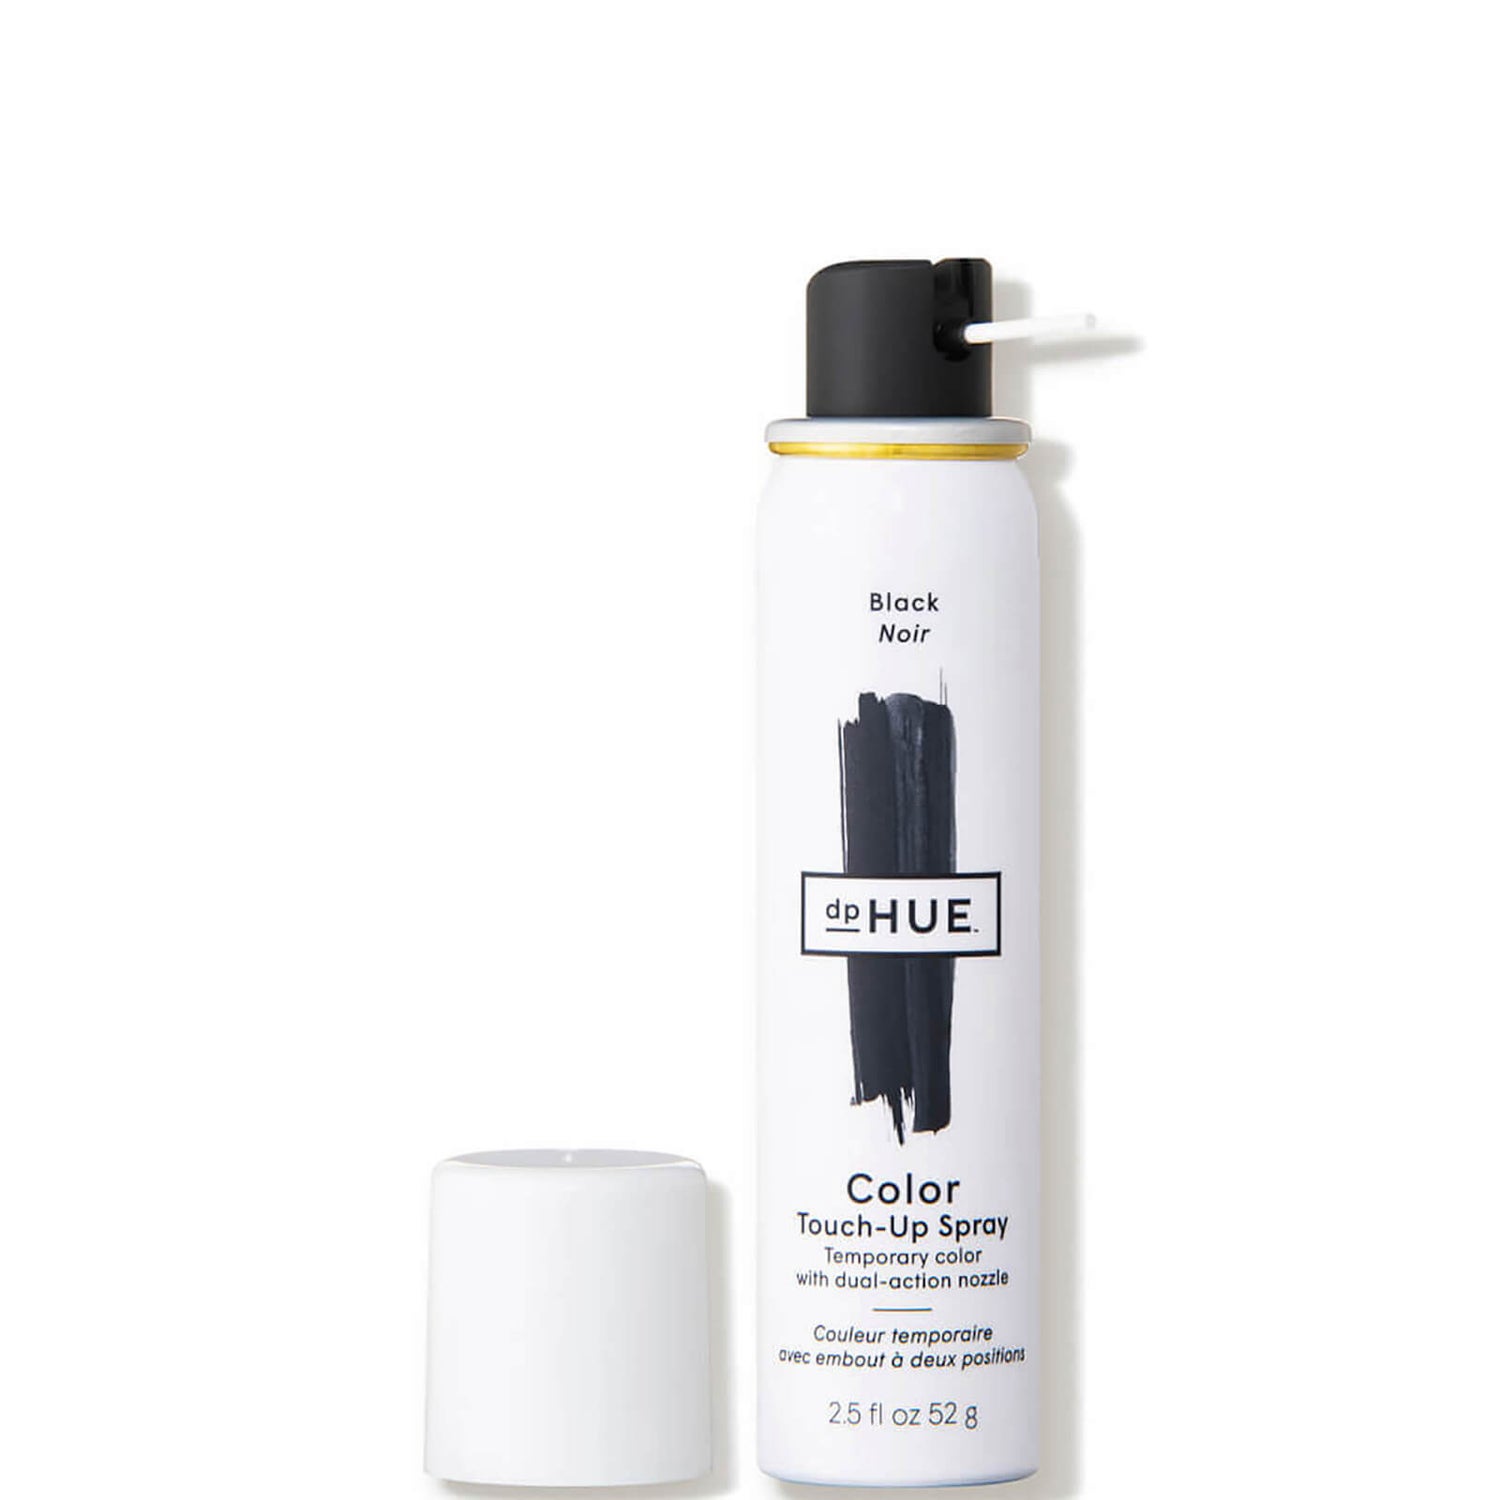 dpHUE Color Touch-Up Spray (2.5 fl. oz.)